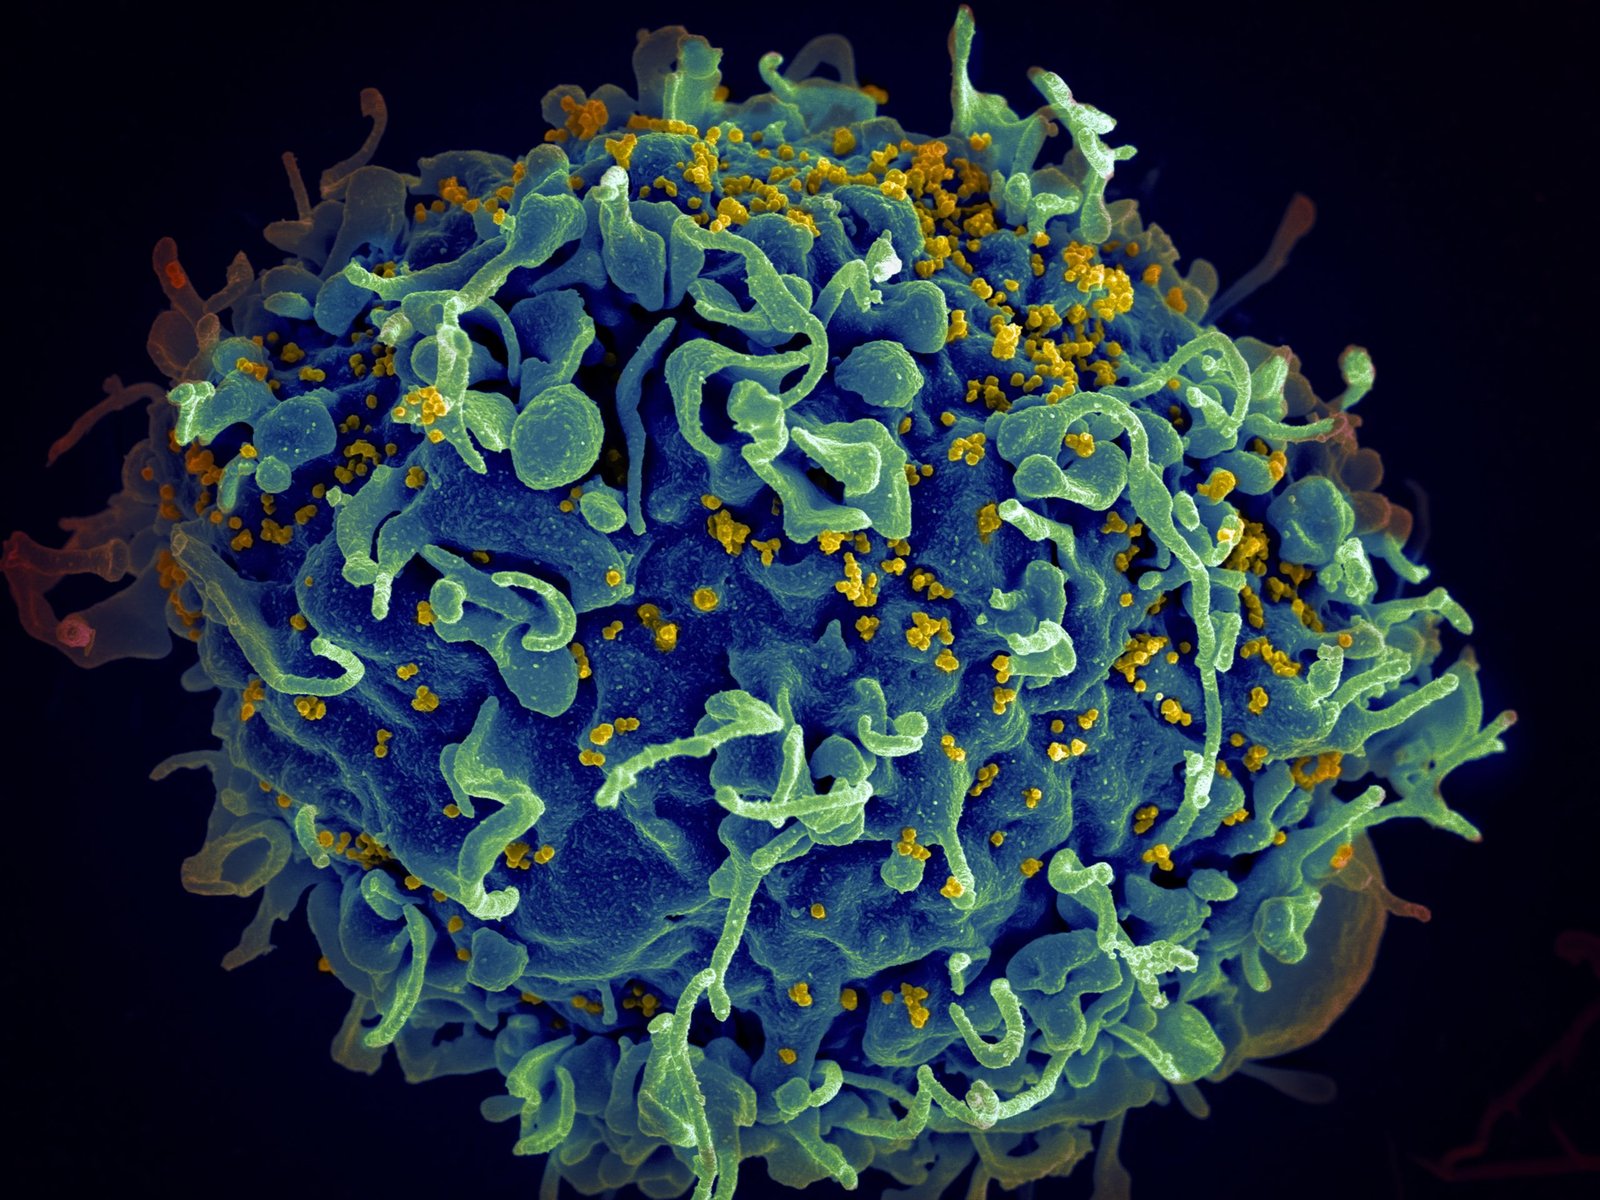 A magnified image shows a T cell (a type of immune cell) infected with HIV. The cell is colored predominantly in blue and green, with the surface covered in yellow virus particles. The background is dark, emphasizing the texture and structure of the cell and viruses.